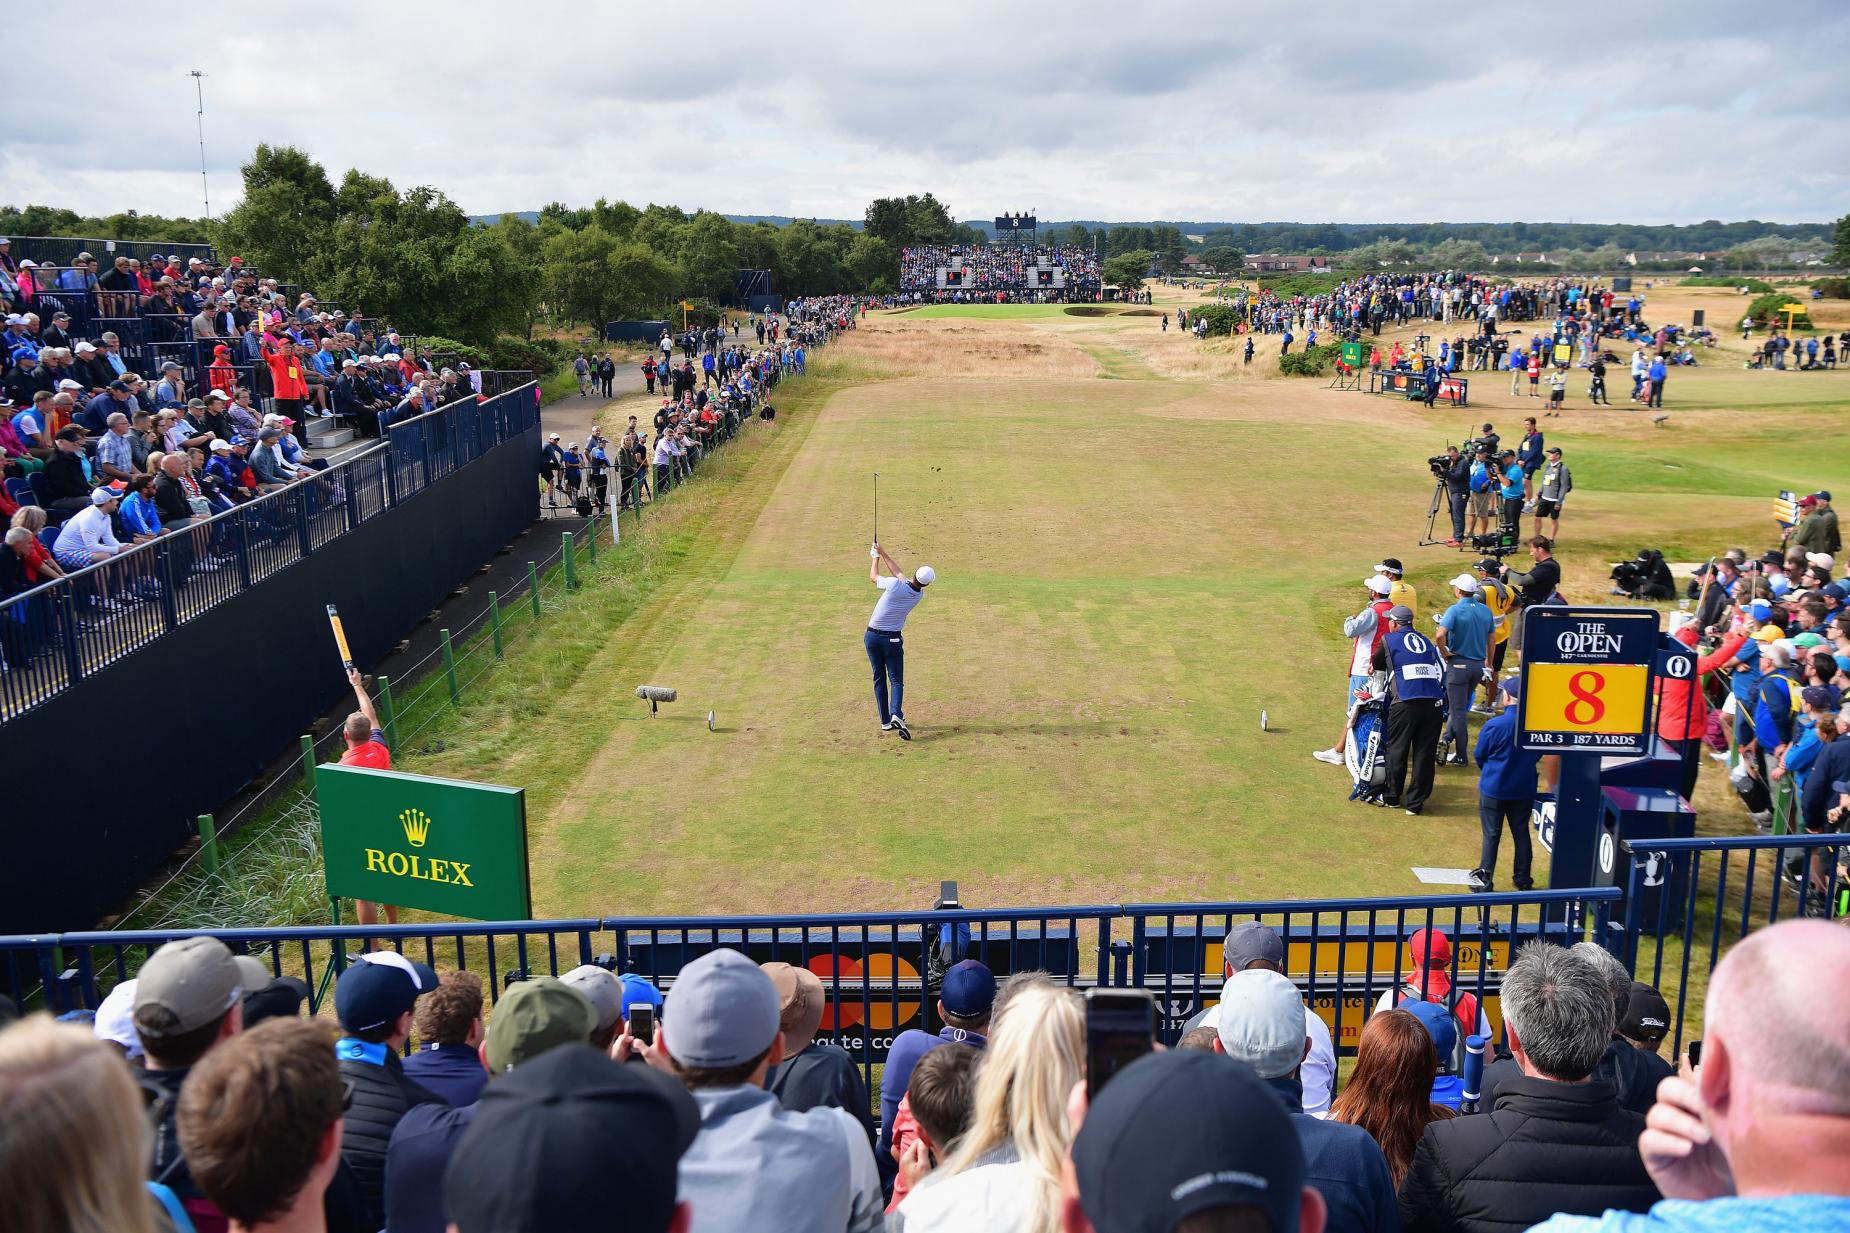 Playing from the front tee, Carnoustie's par-3 8th, shown during the 2018 Open Championship, offers a variety of unique pin position. (Photo: Stuart Franklin) 